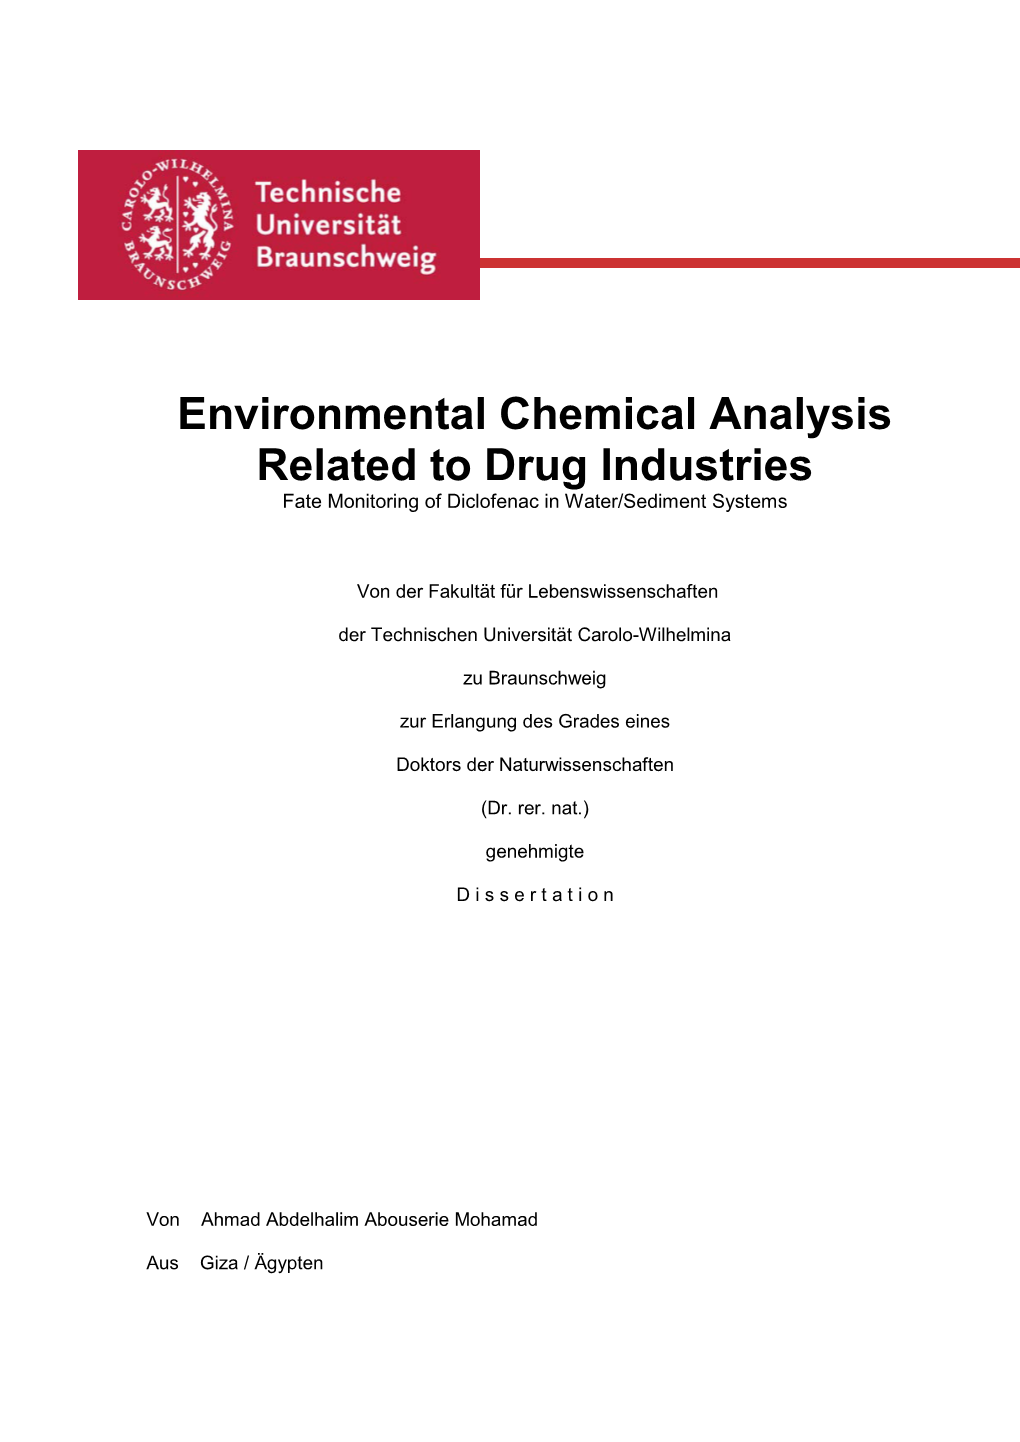 Environmental Chemical Analysis Related to Drug Industries Fate Monitoring of Diclofenac in Water/Sediment Systems